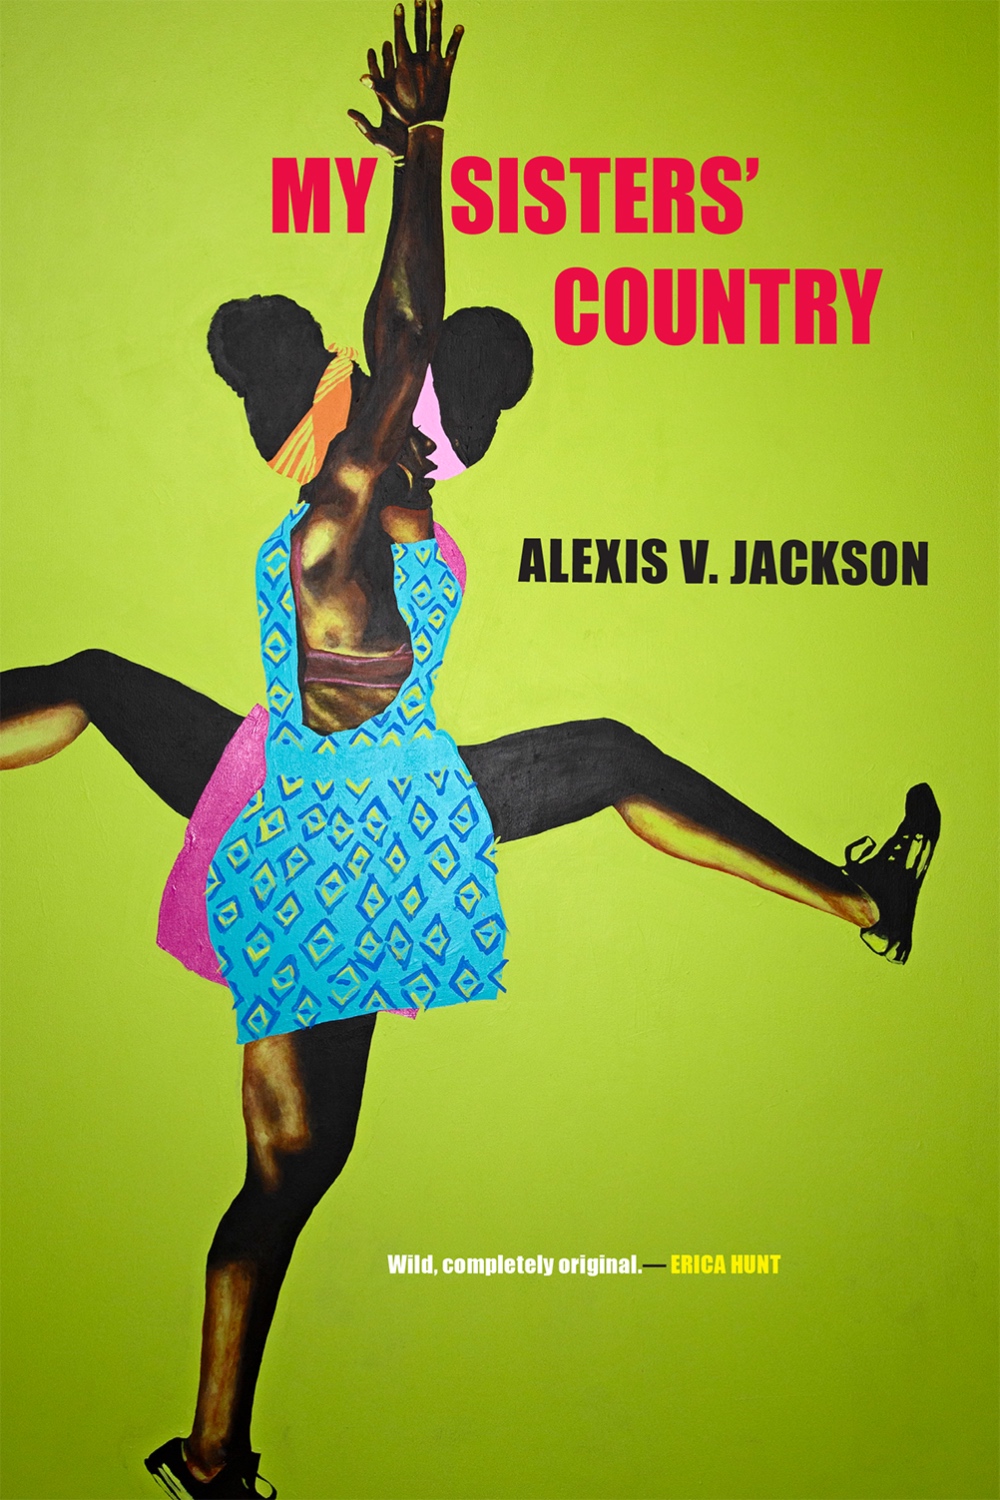 book jacket with green background and two black women standing shoulder to shoulder and clapping